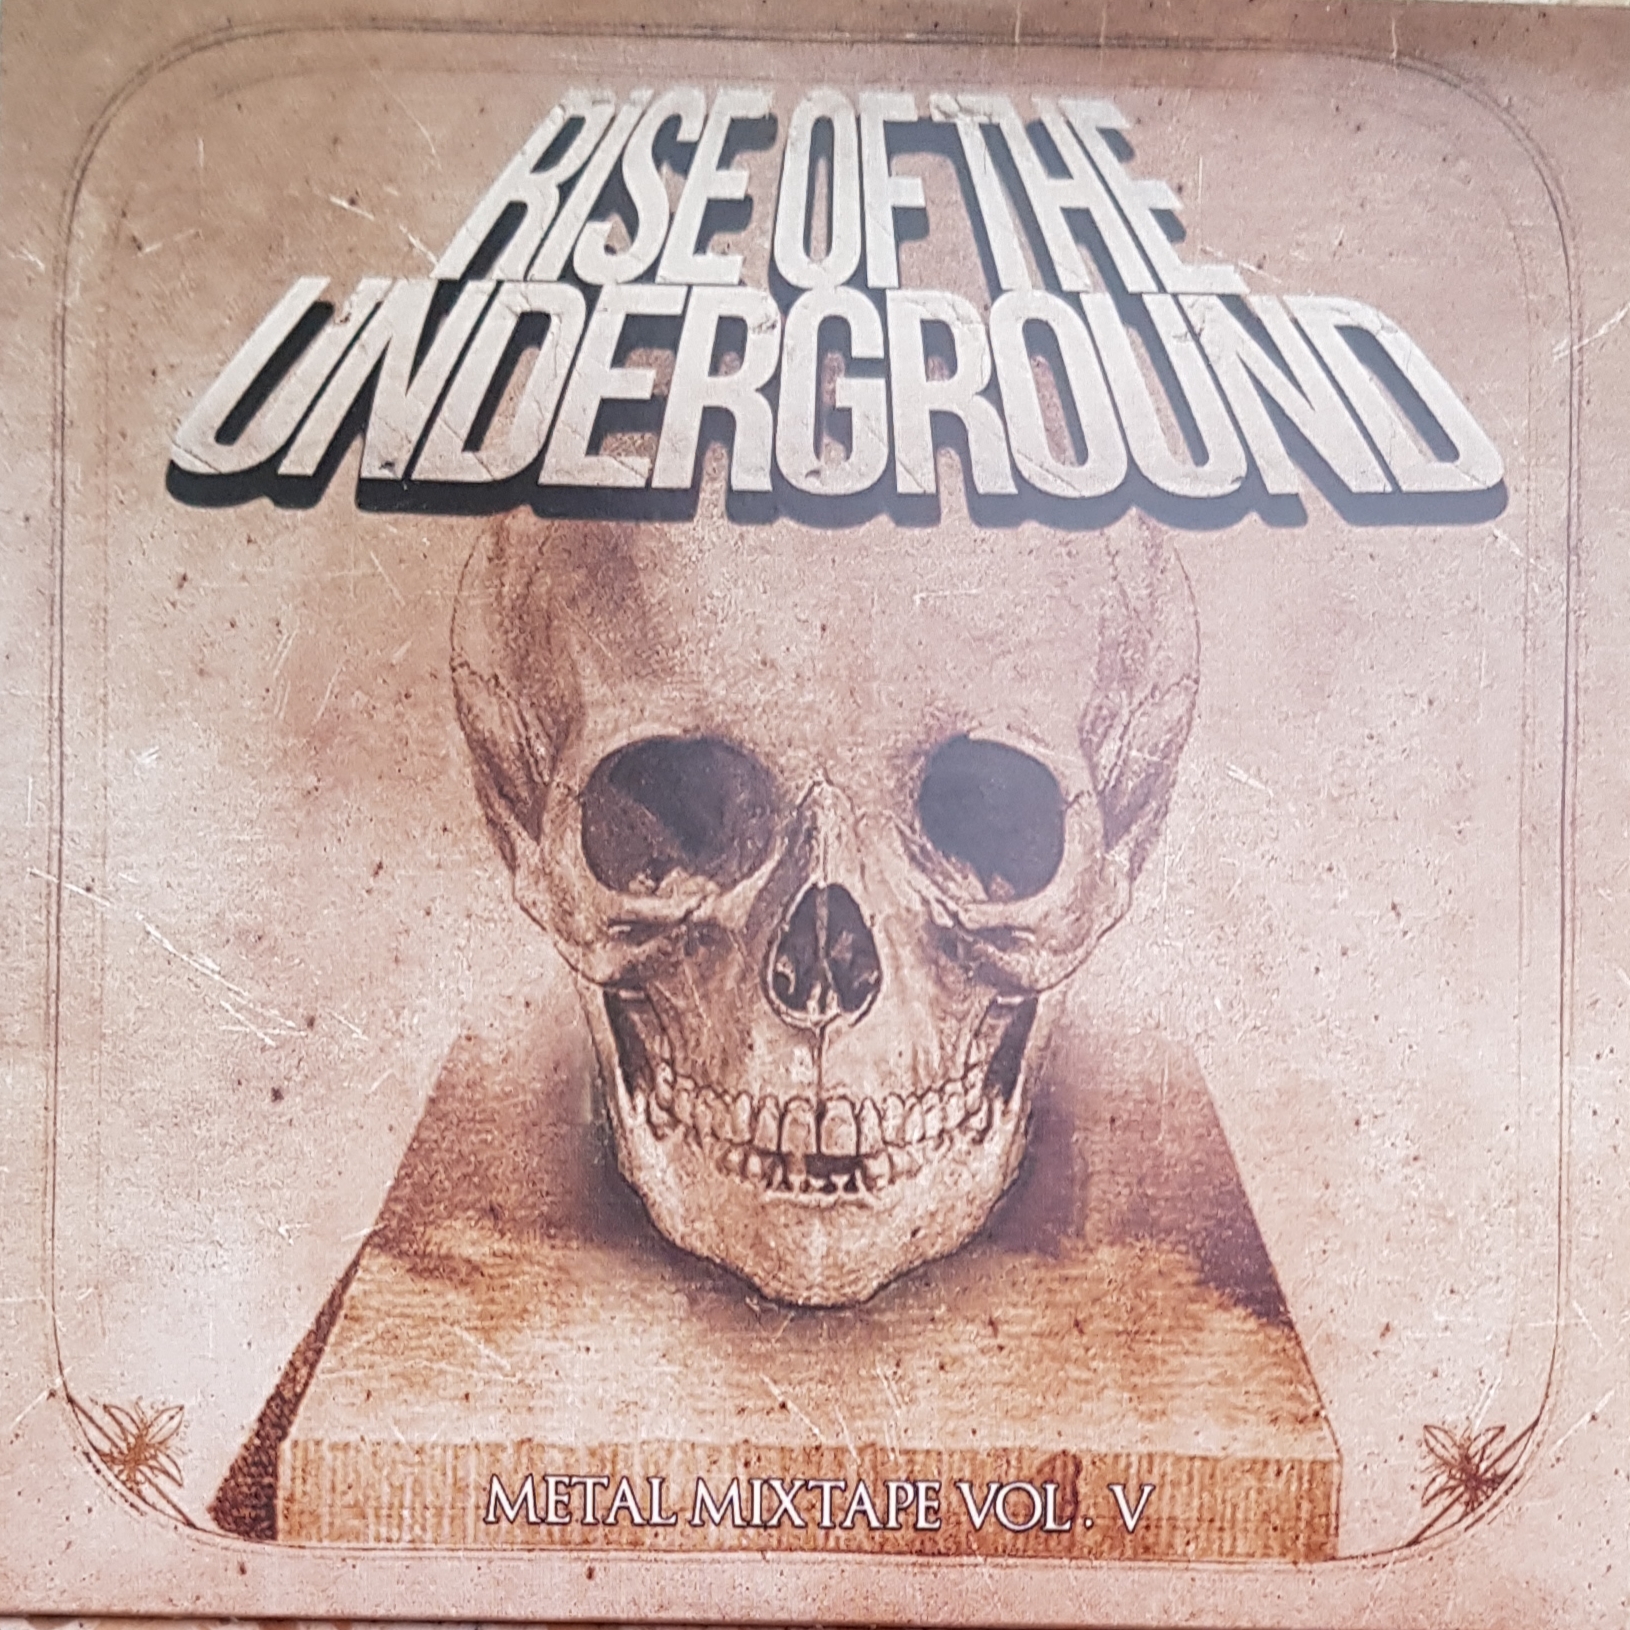 V/A RISE OF THE UNDERGROUND Mixtape Vol. 5